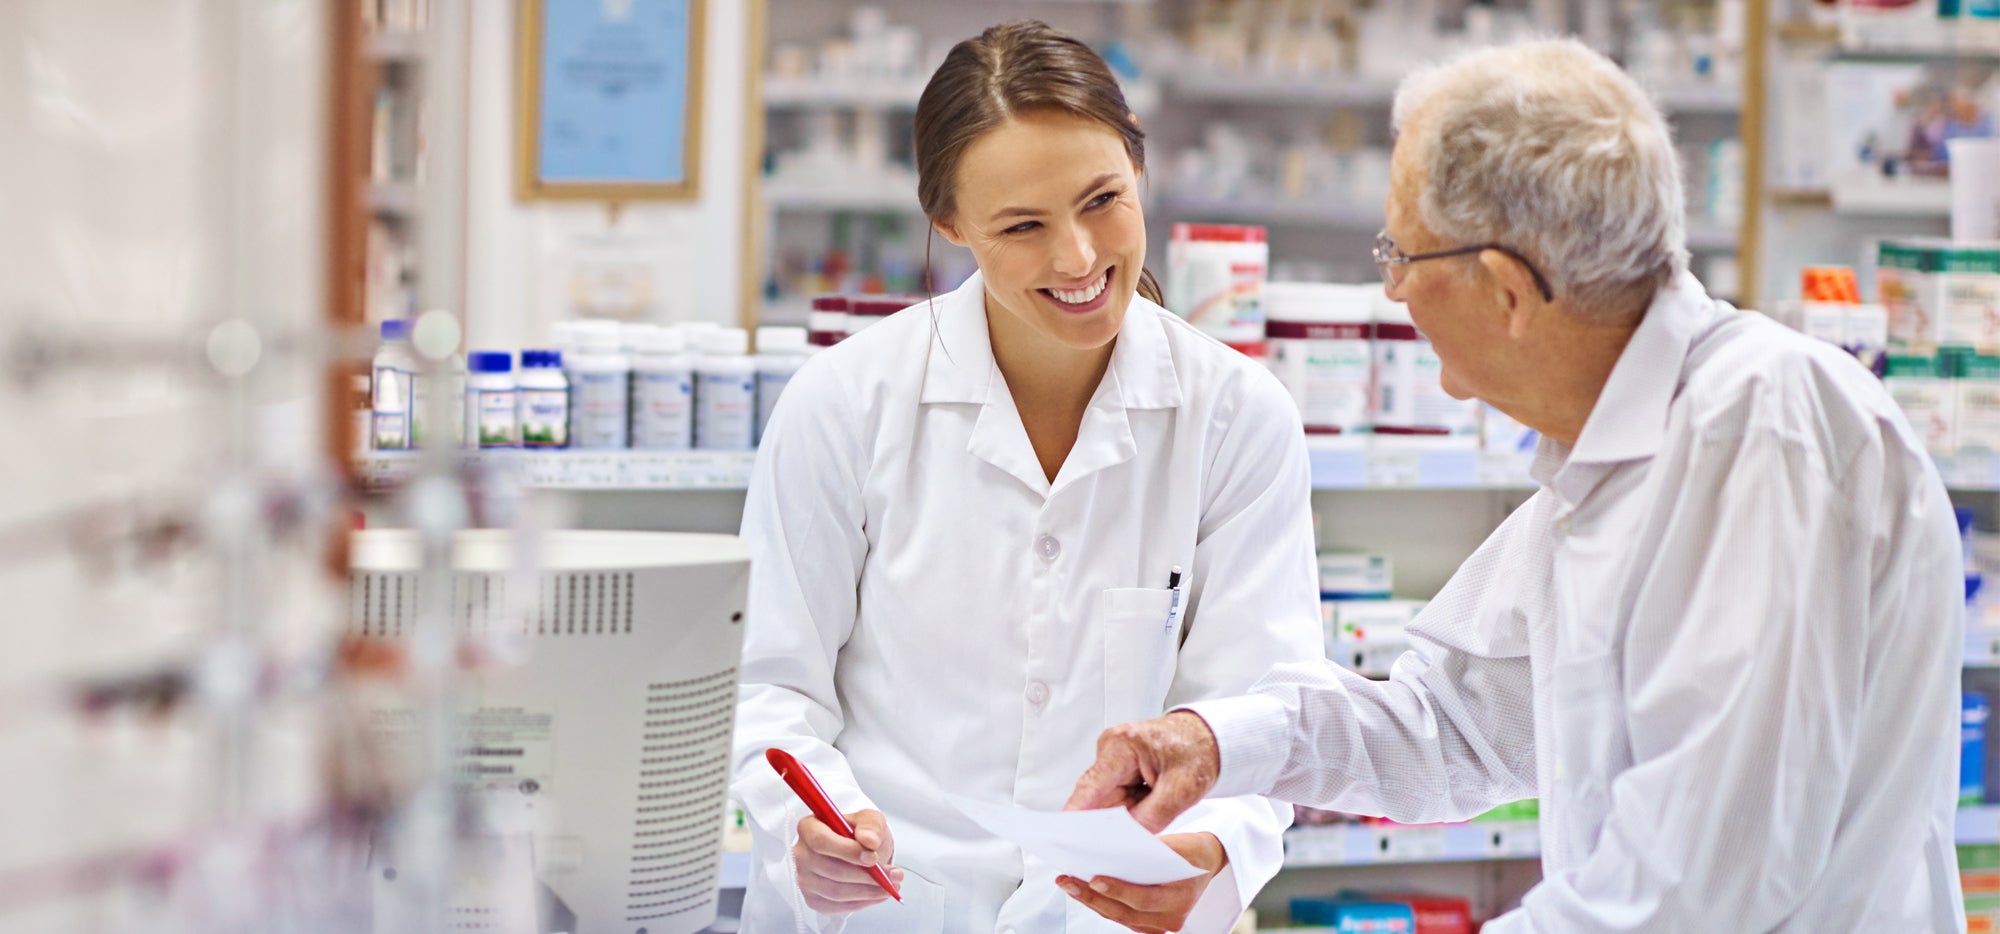 smiling pharmacist talking to patient